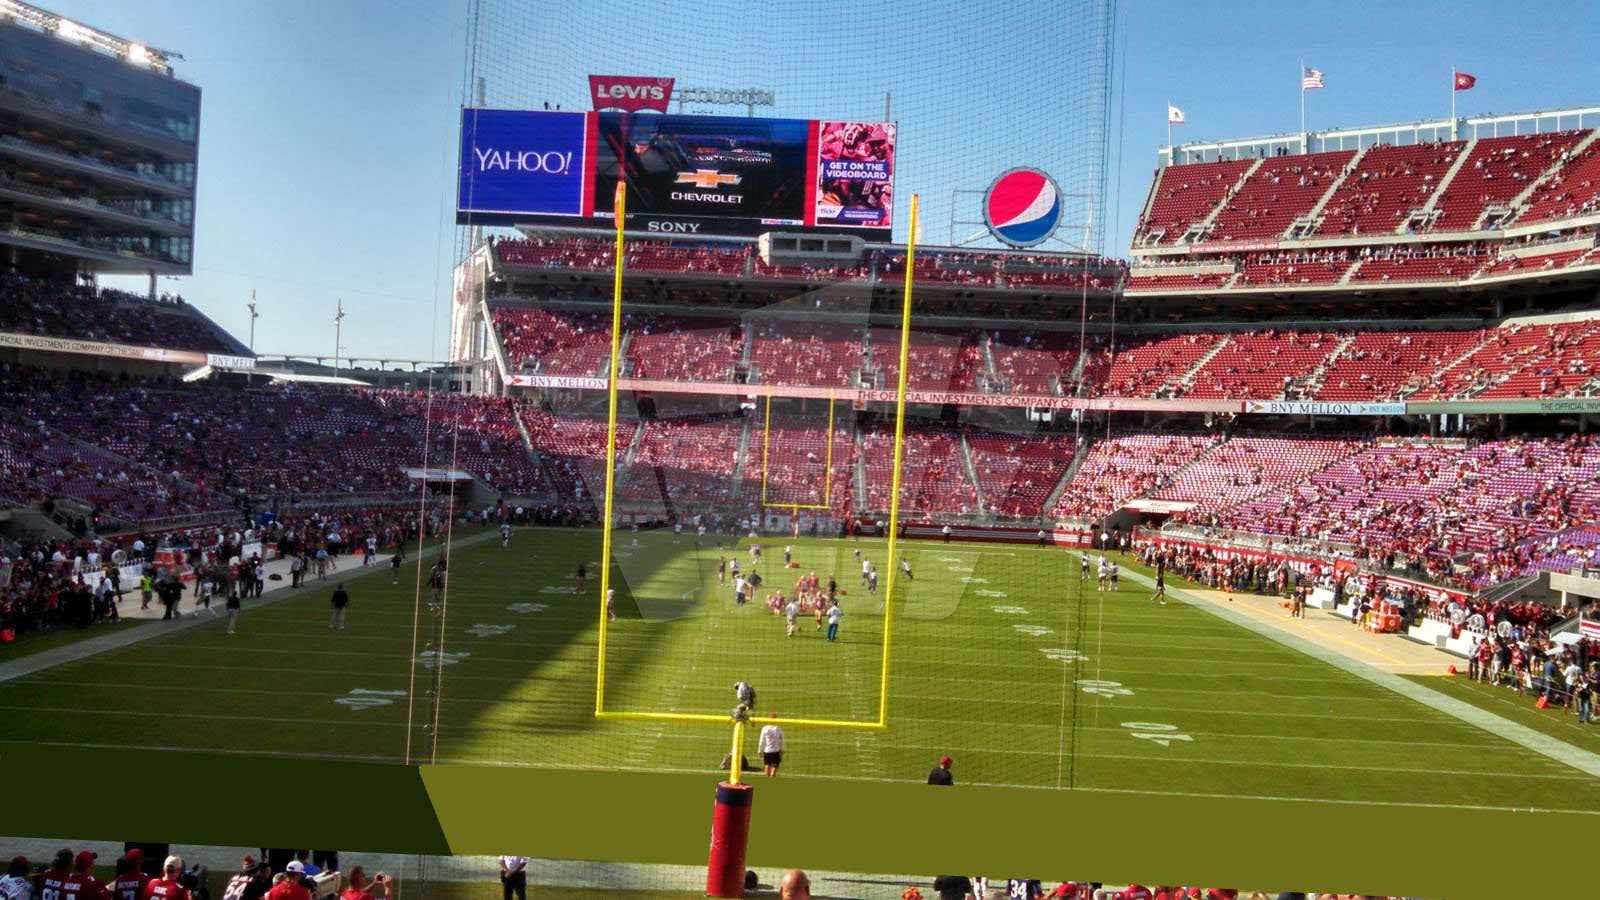 section 127, row 25 seat view  - levi